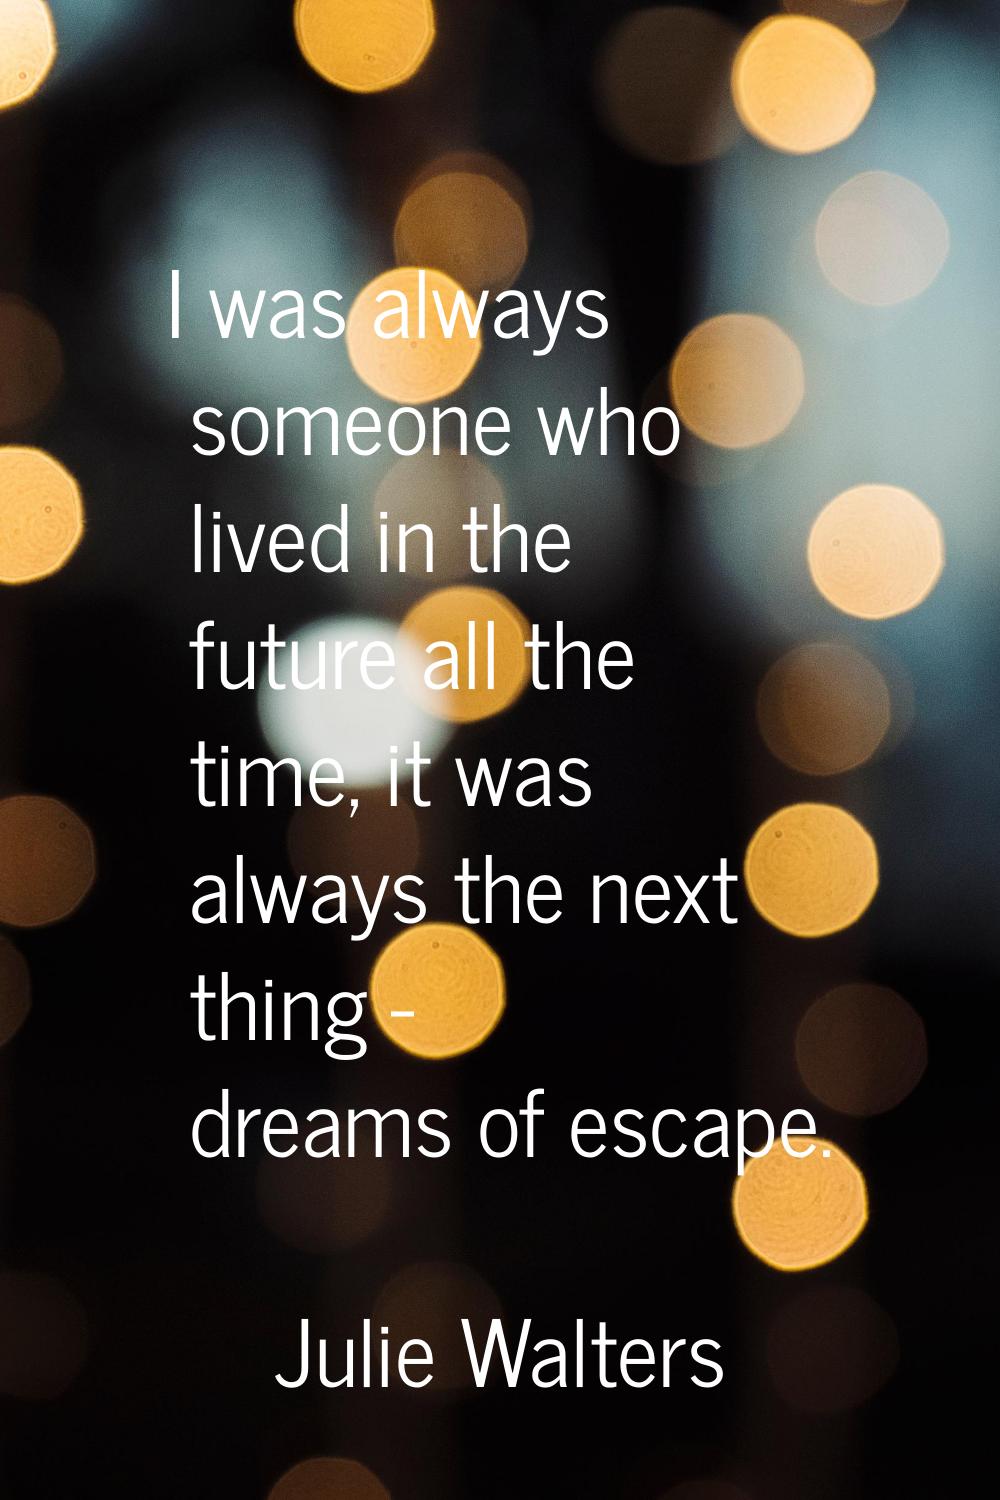 I was always someone who lived in the future all the time, it was always the next thing - dreams of